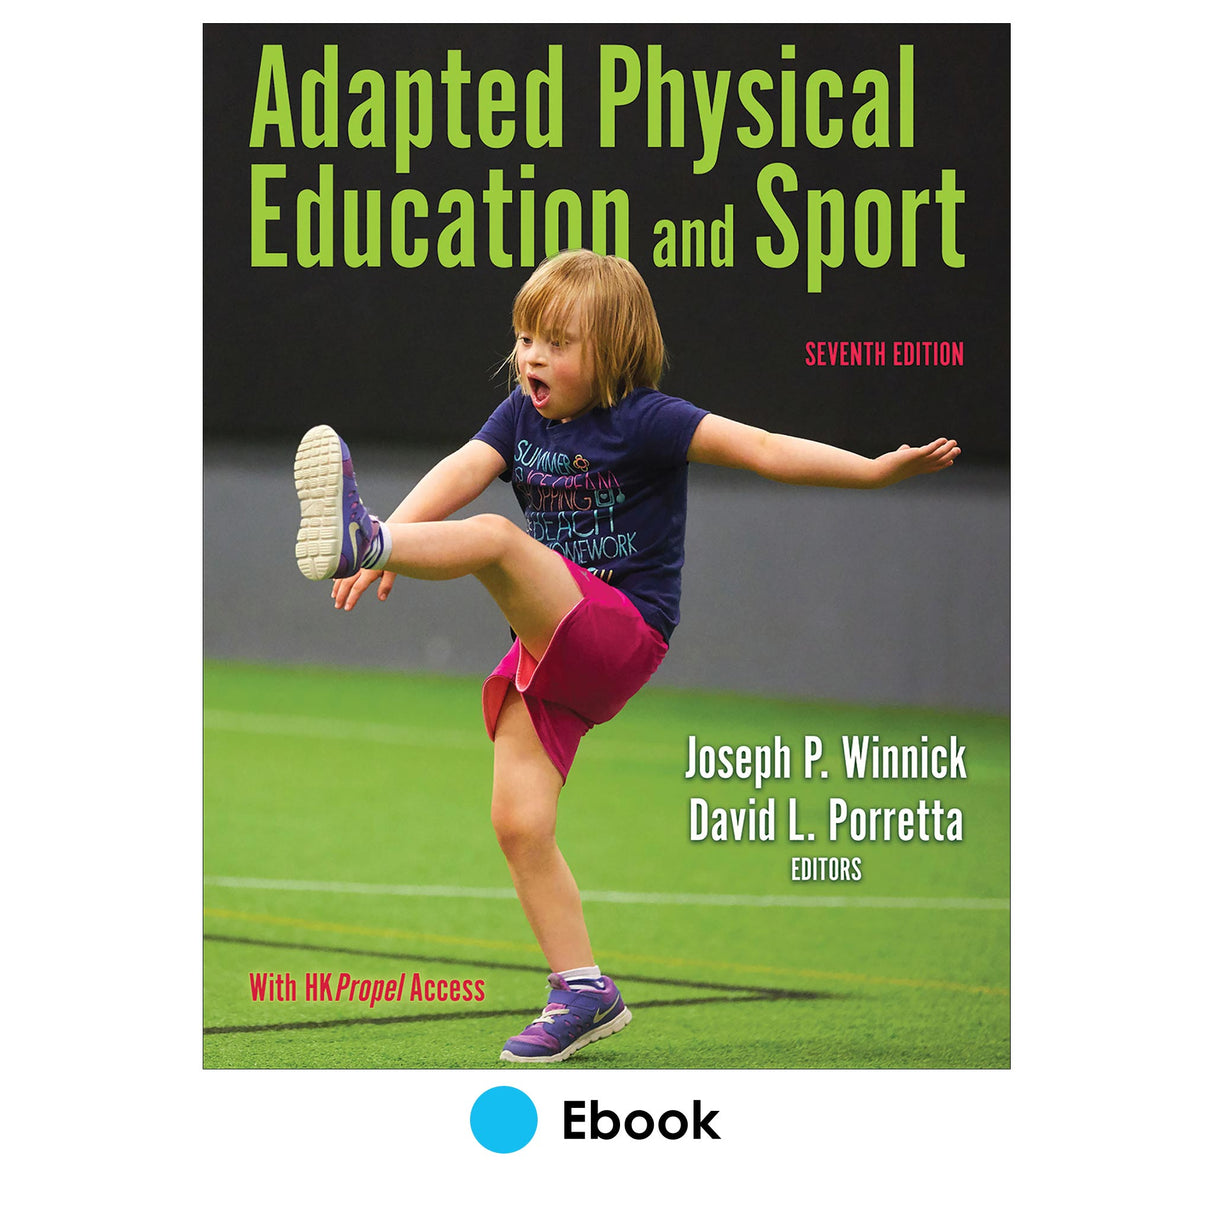 Adapted Physical Education and Sport 7th Edition Ebook With HKPropel Access